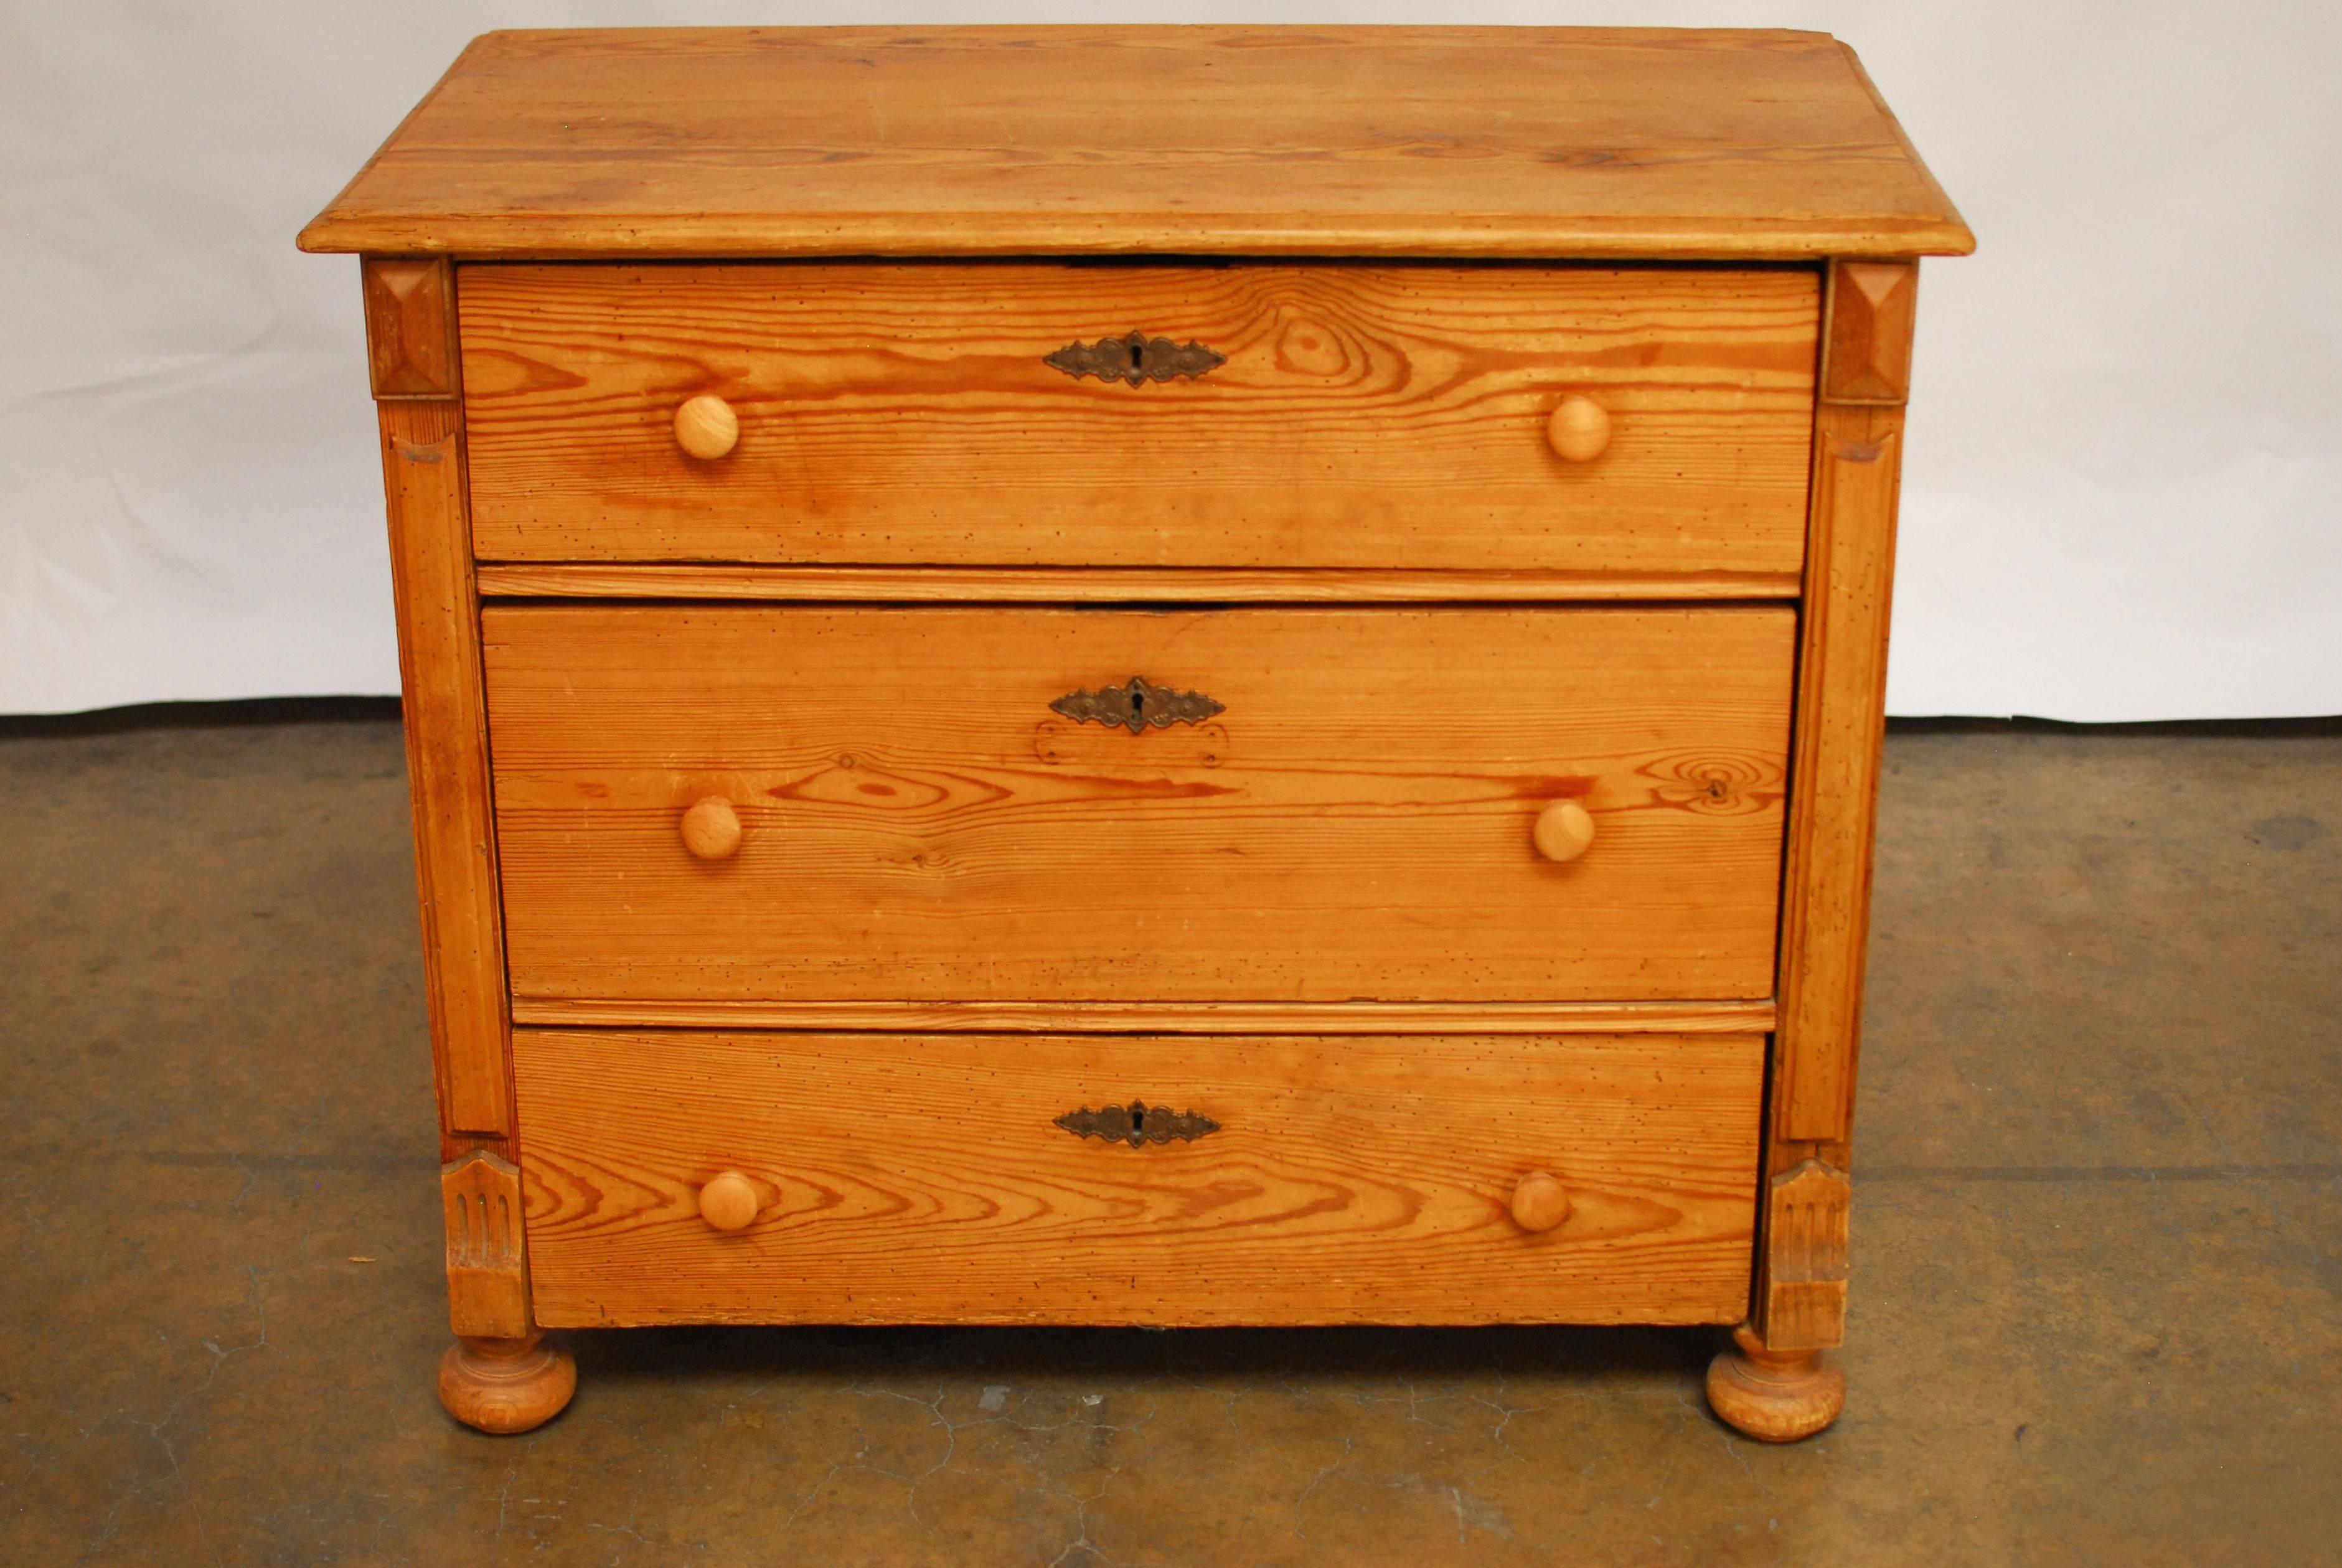 A rustic, 19th century French country pine three-drawer commode with a natural raw finish with a warm soft patina and worm holes on the vintage surfaces. Round wood pulls and decorative escutcheons add to the vintage look. This chest of drawers sits